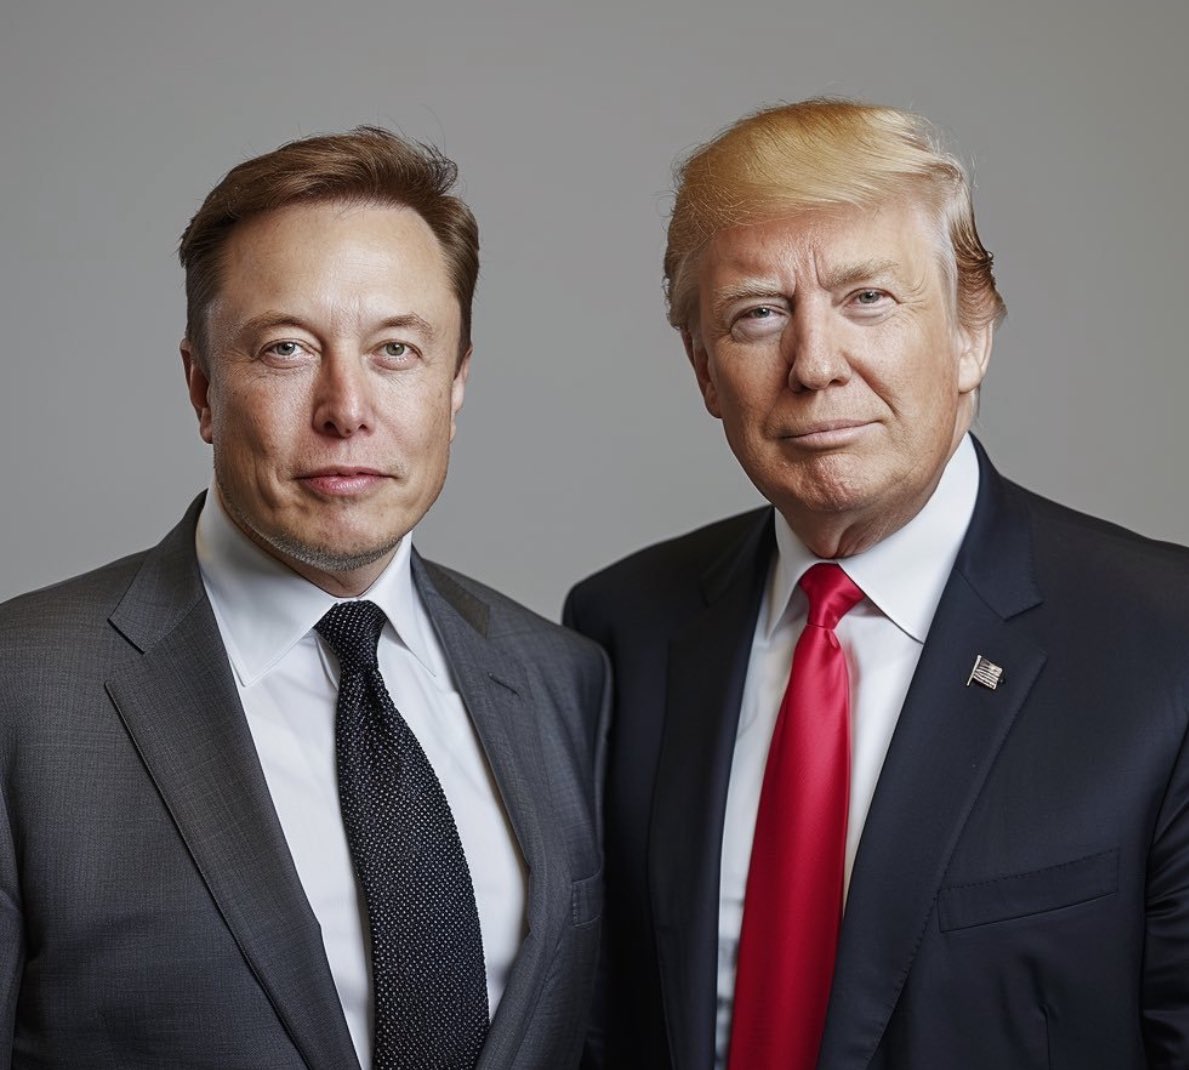 When President Trump is re-elected - his first Presidential Freedom Award should go to Elon Musk.